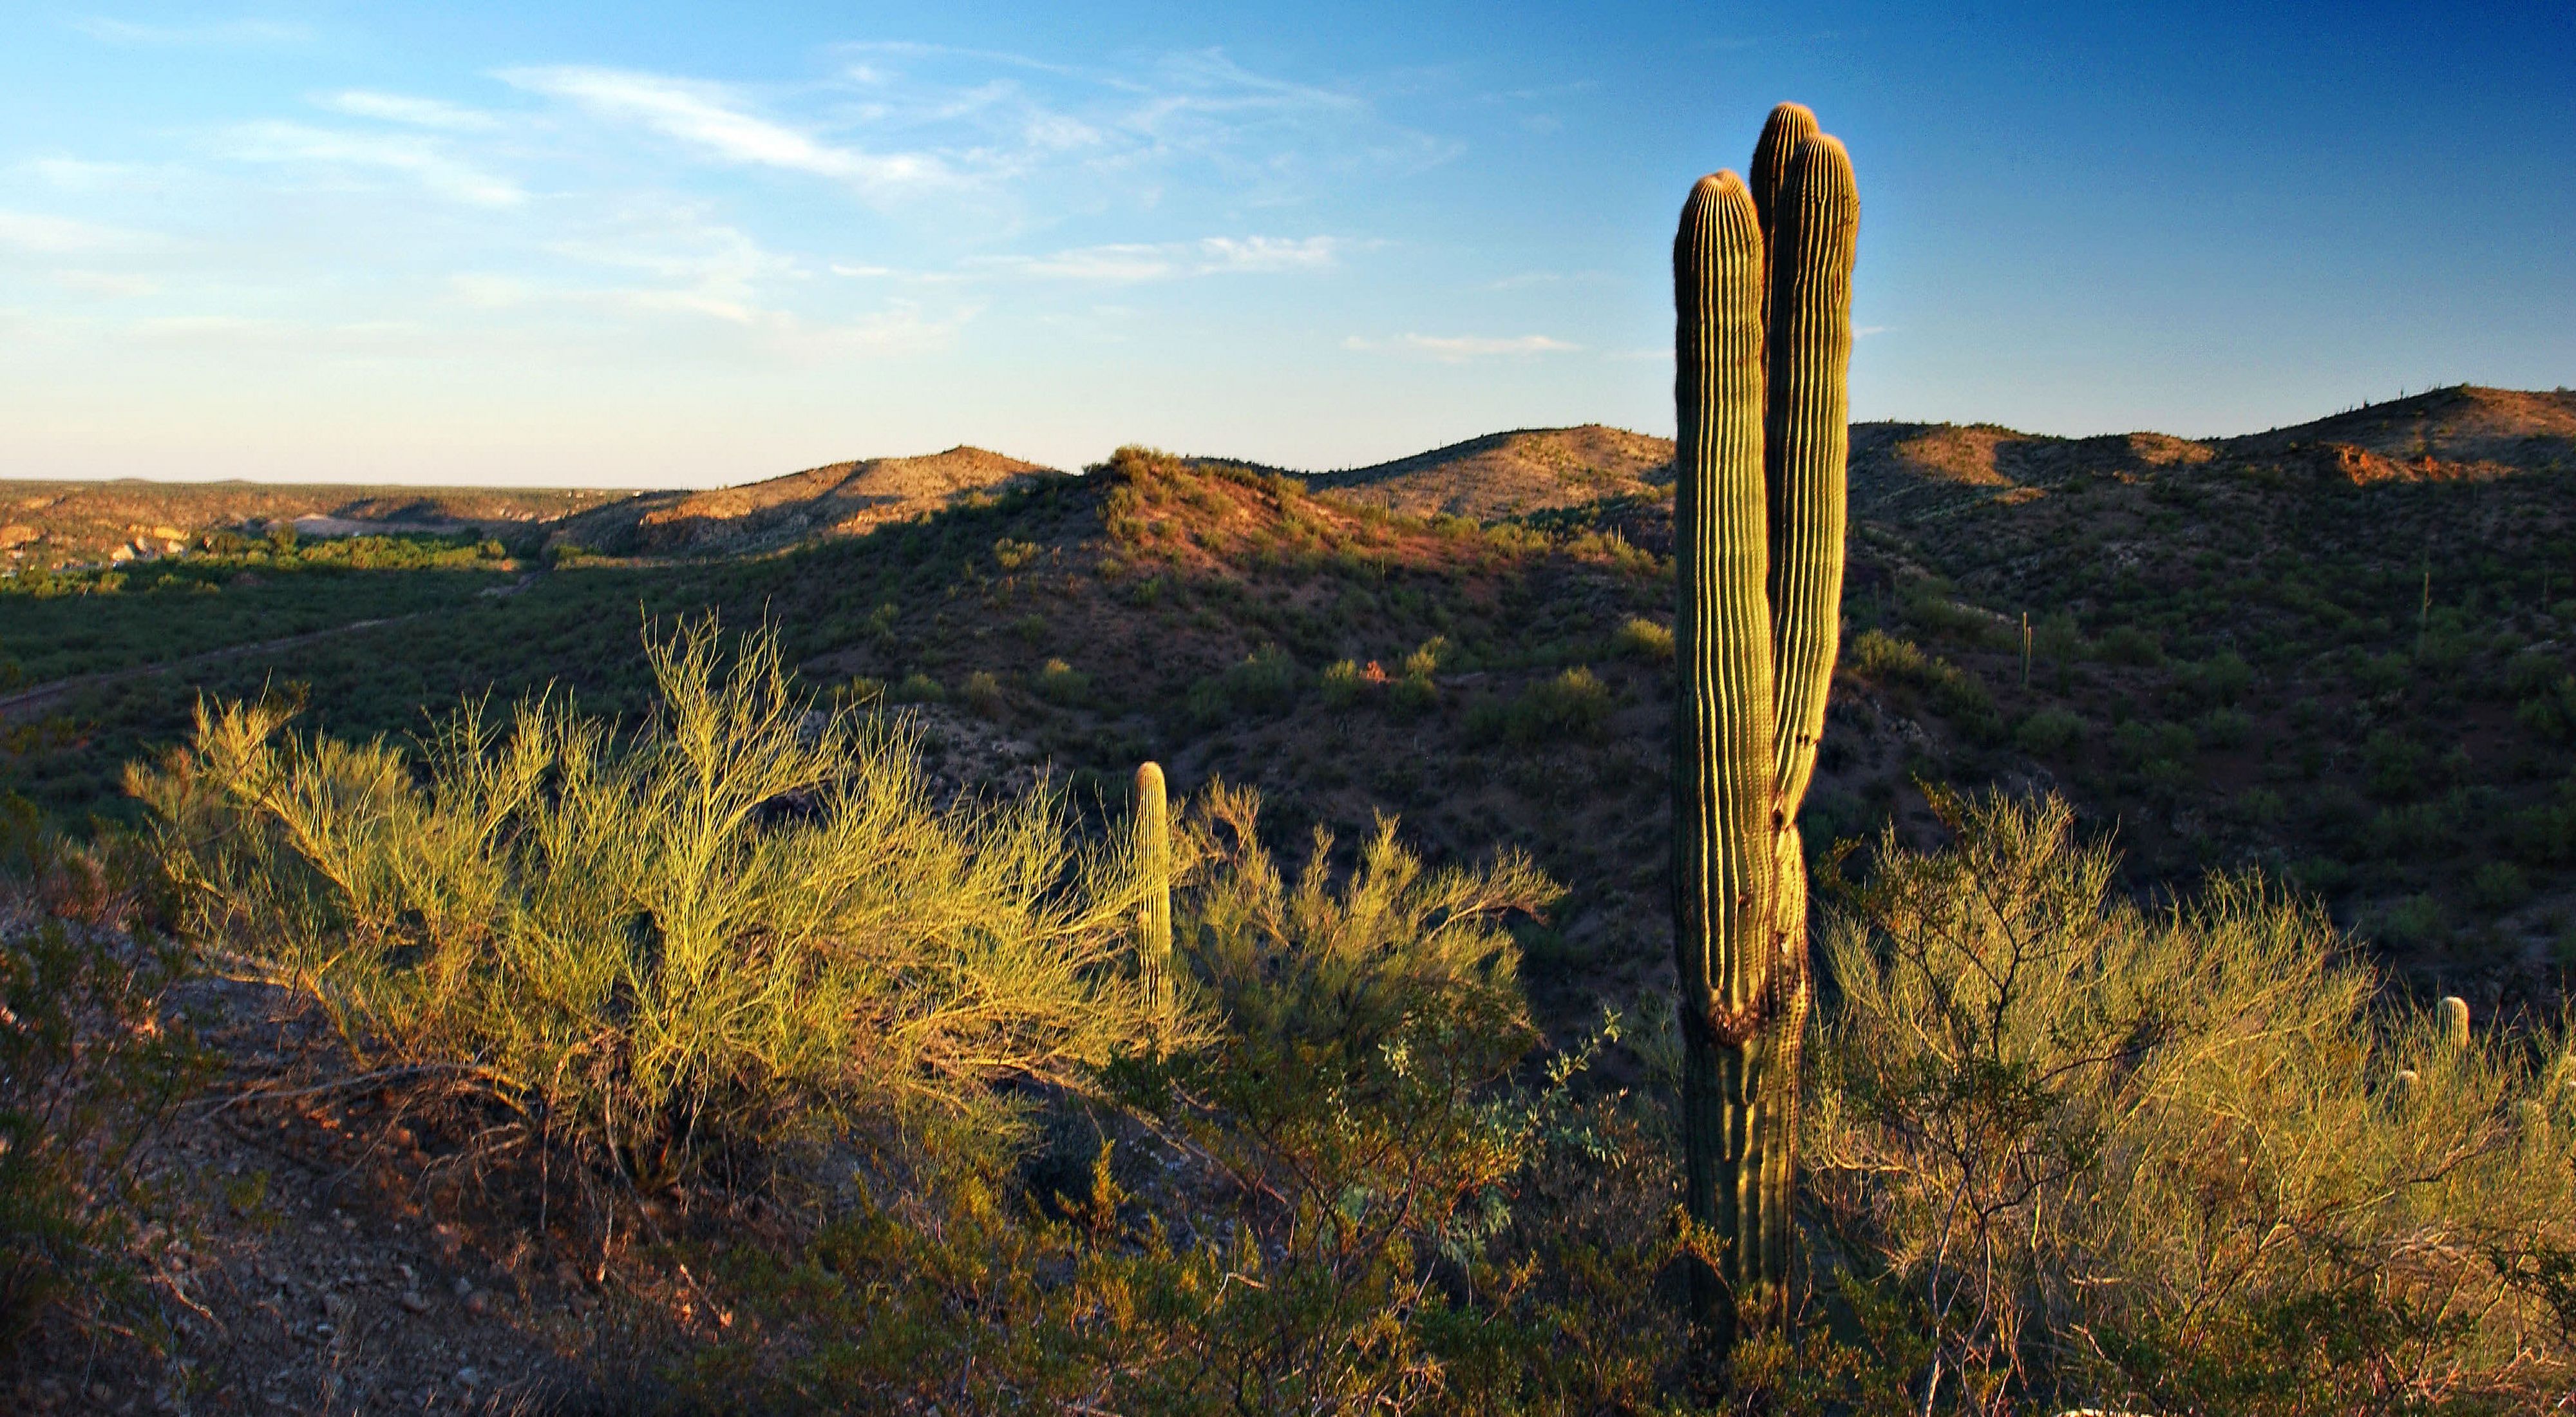 Sunset view of a desert landscape with a cactus in the 